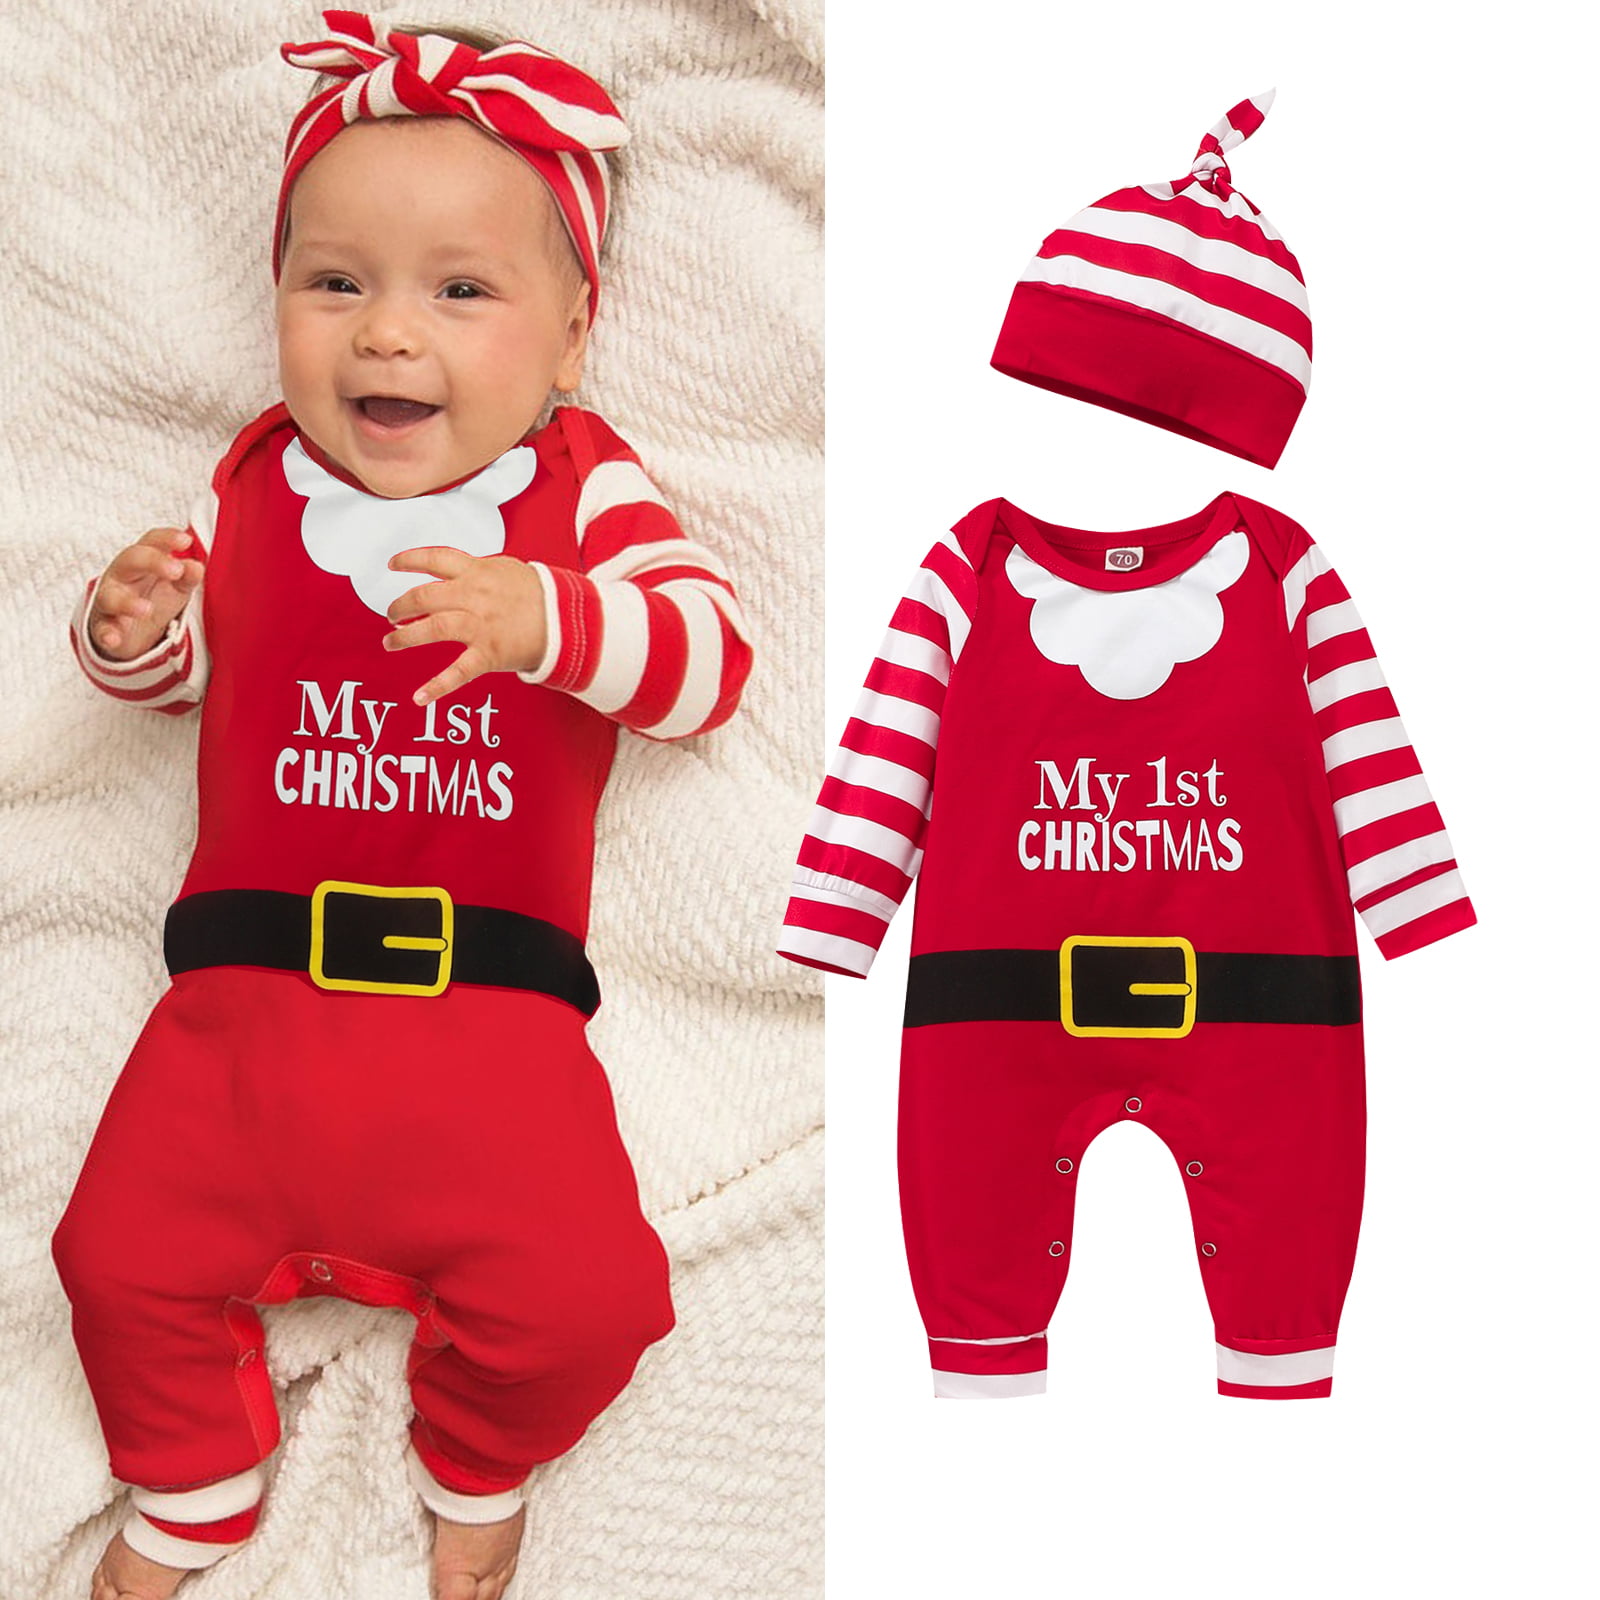 2PCS Unisex Baby First Christmas Santa Claus Striped Romper Jumpsuits with Hats Xmas Clothing Sets